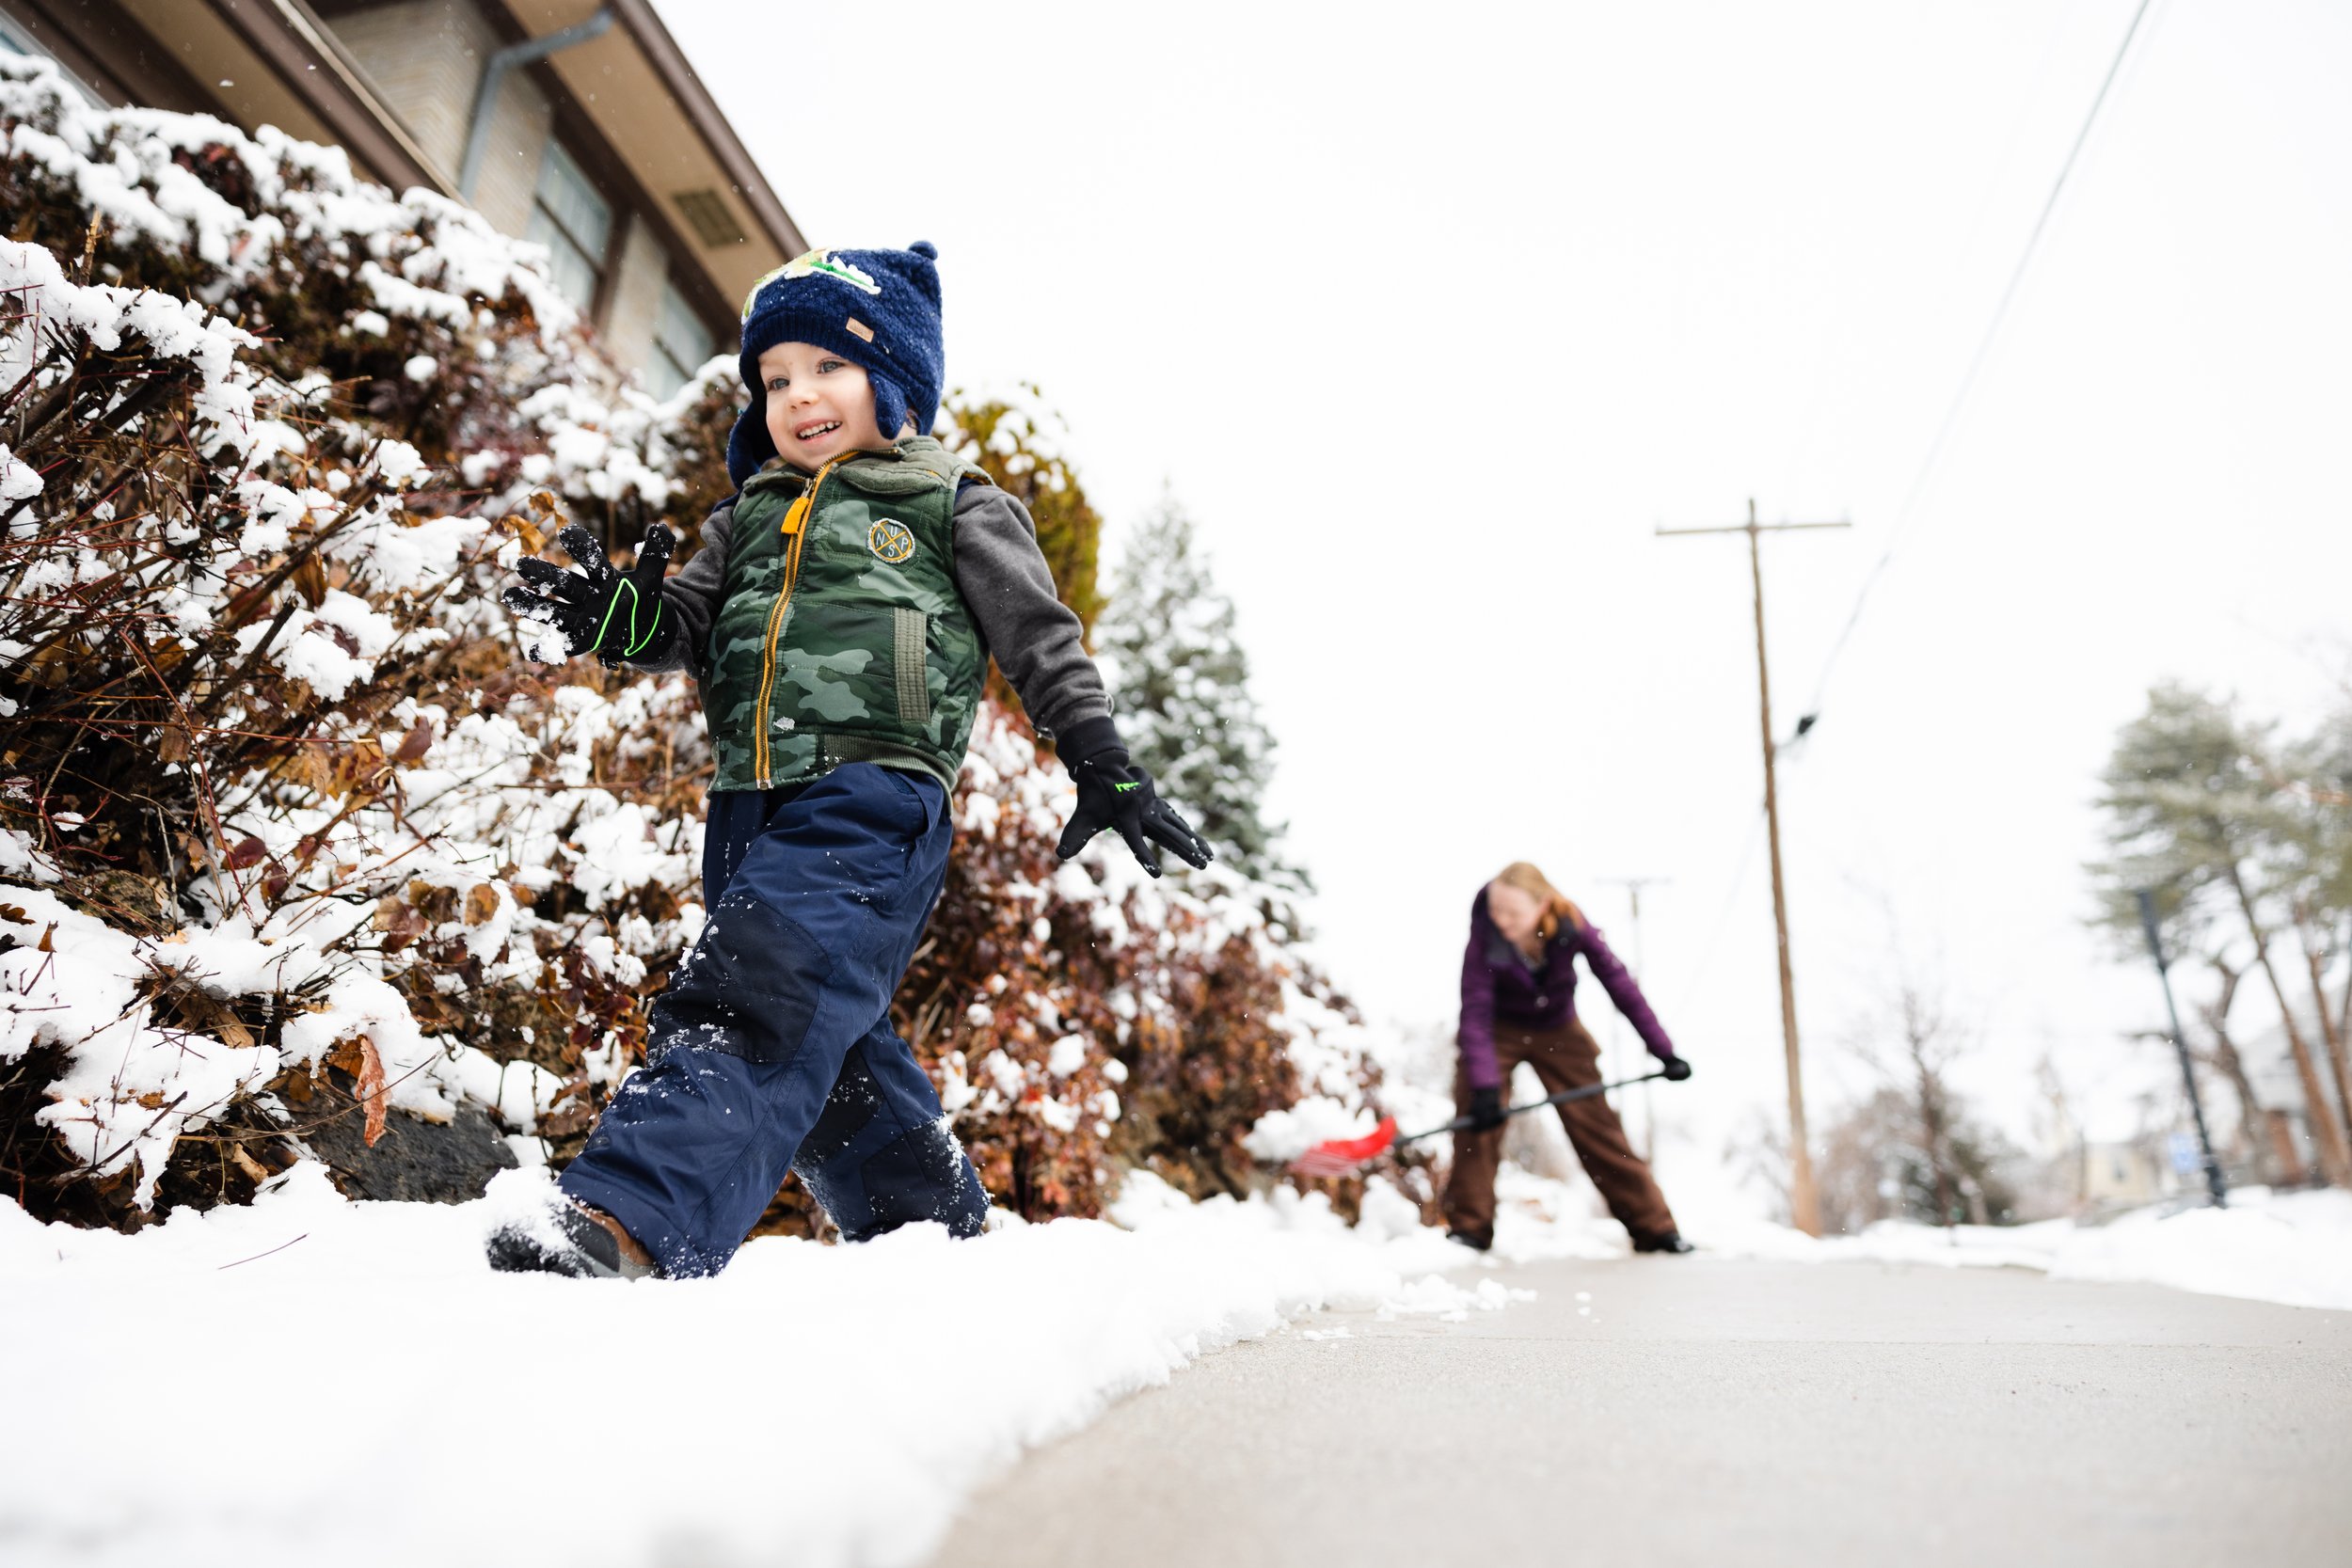  Sebastian Stephenson, 3, plays with snow as his mother Whitney Stephenson shovels her sidewalk after a record breaking snowfall in Salt Lake City on March 24, 2023.  